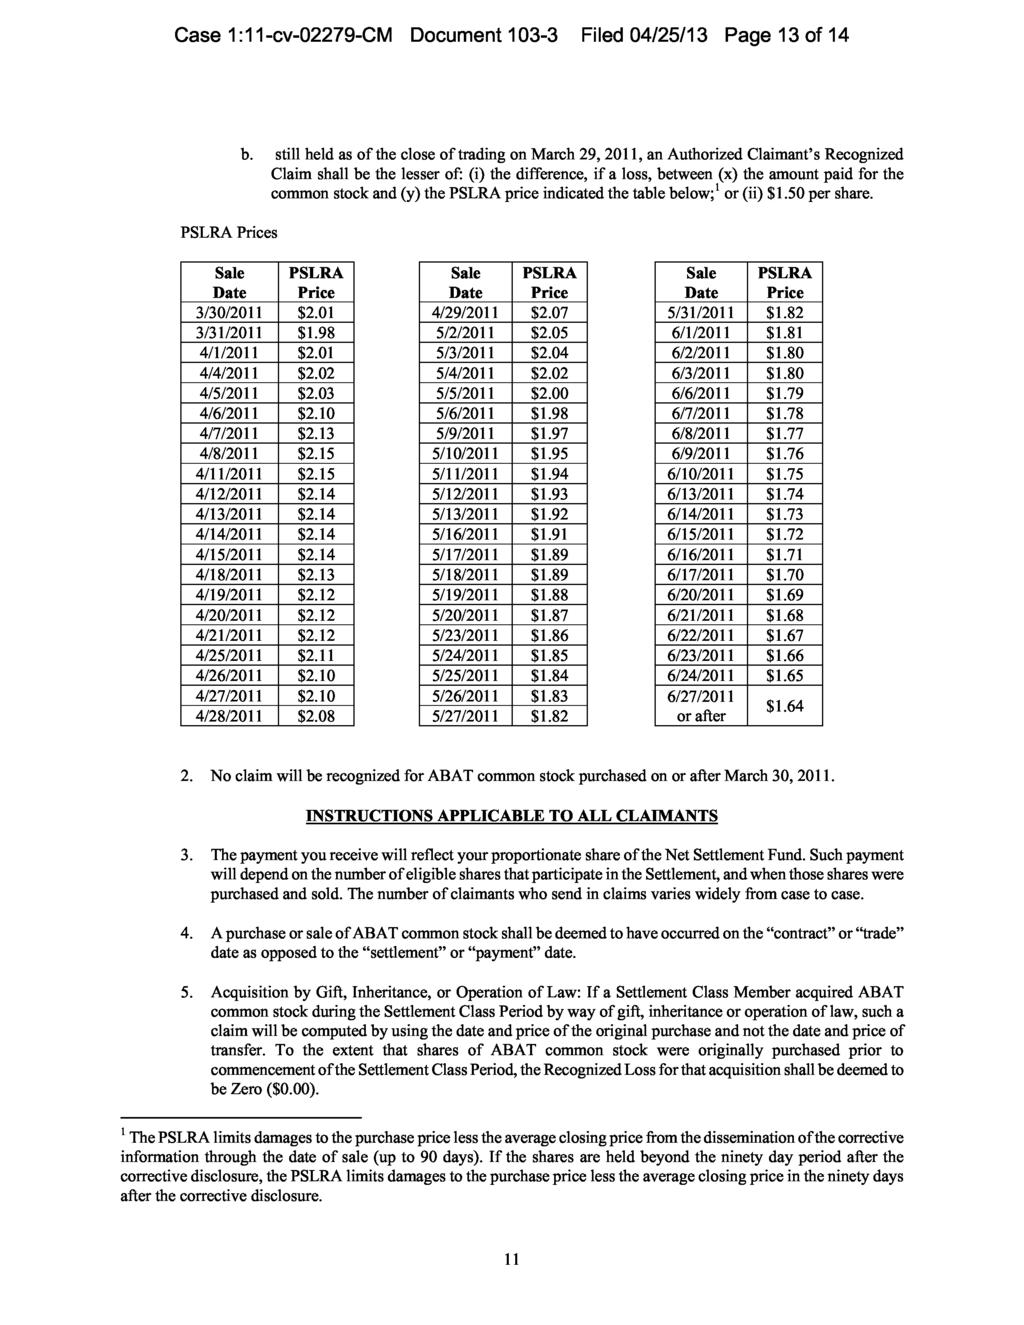 Case 1:11-cv-02279-CM Document 103-3 Filed 04/25/13 Page 13 of 14 PSLRA Prices b.